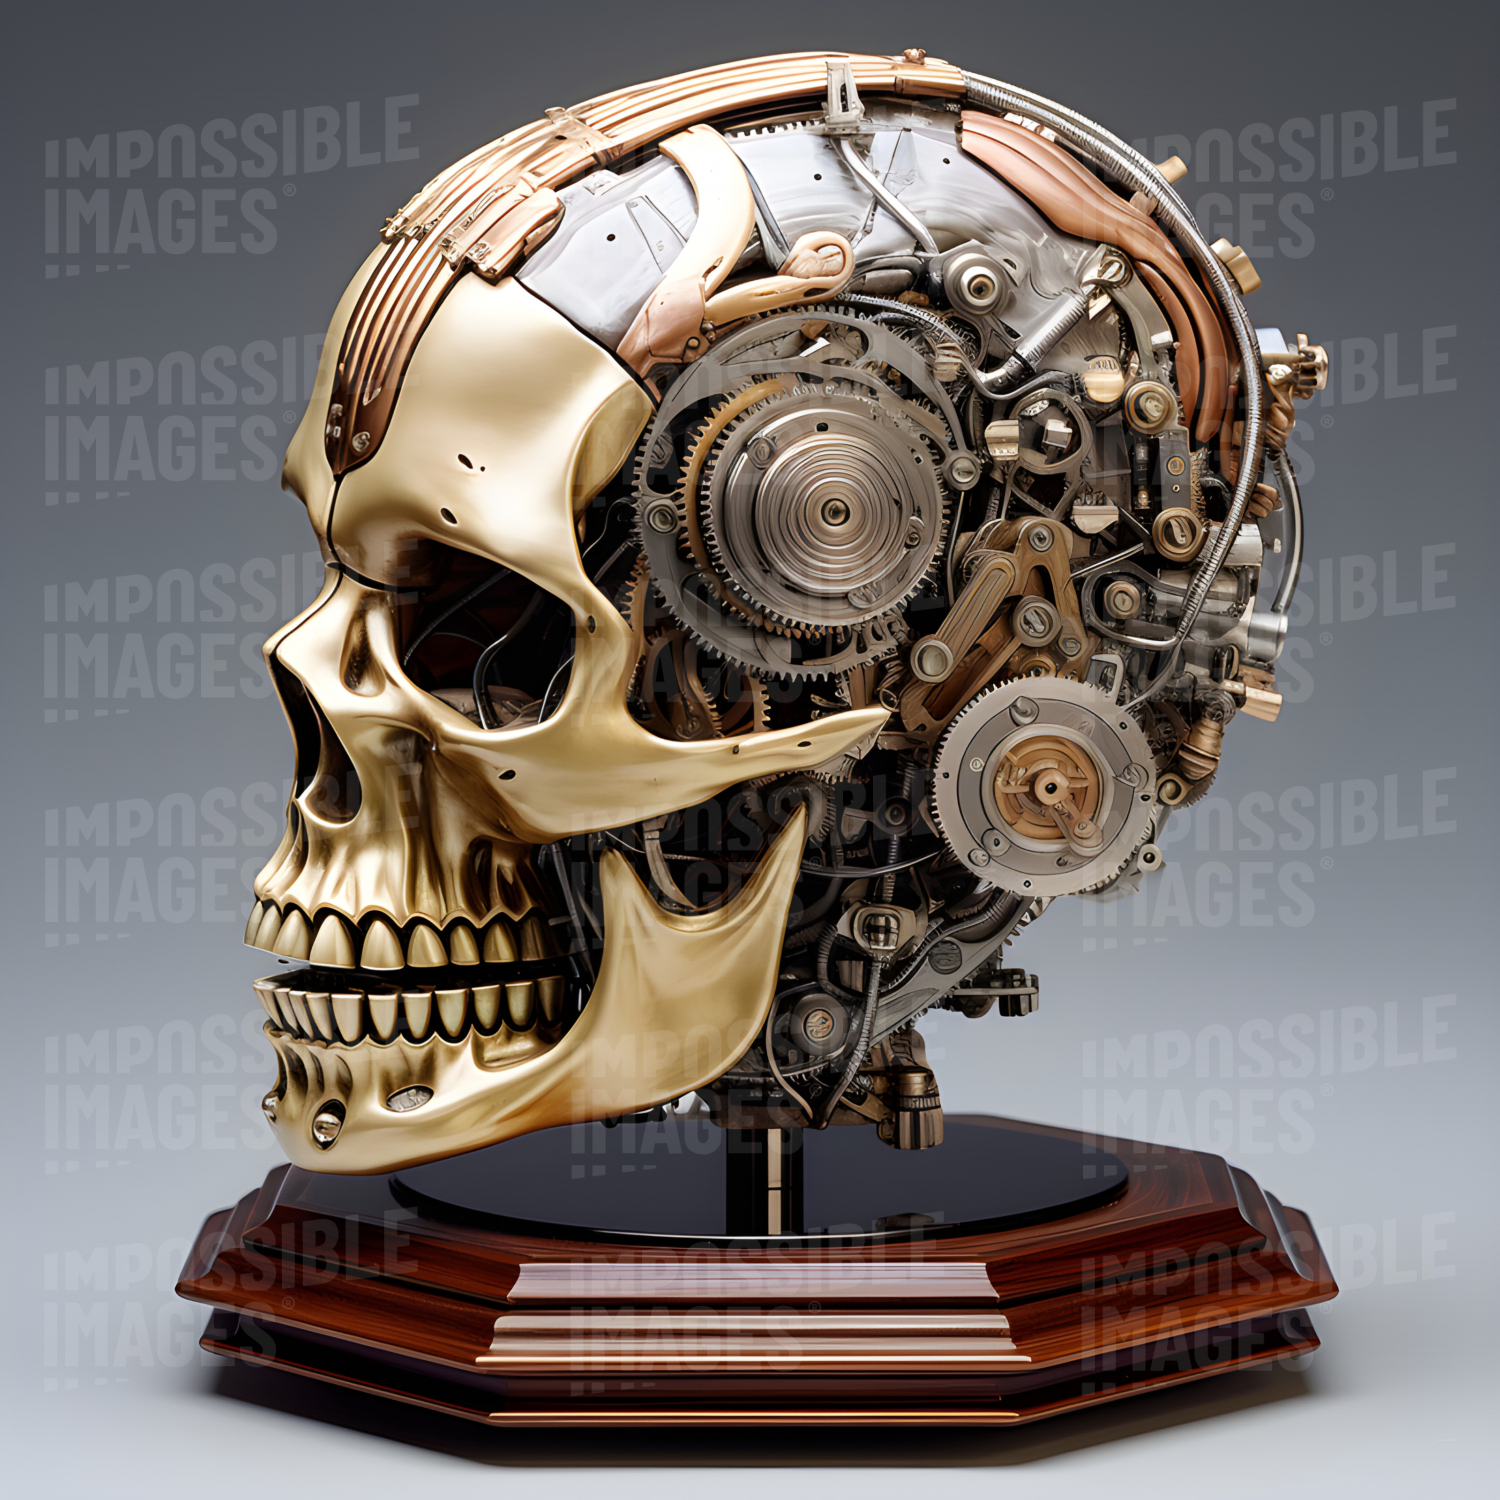 Ornate model of a stylised human skull with complex clockwork inside -  An intricately crafted model of a stylised human skull, with a complex clockwork mechanism inside, intricately designed with ornate details.